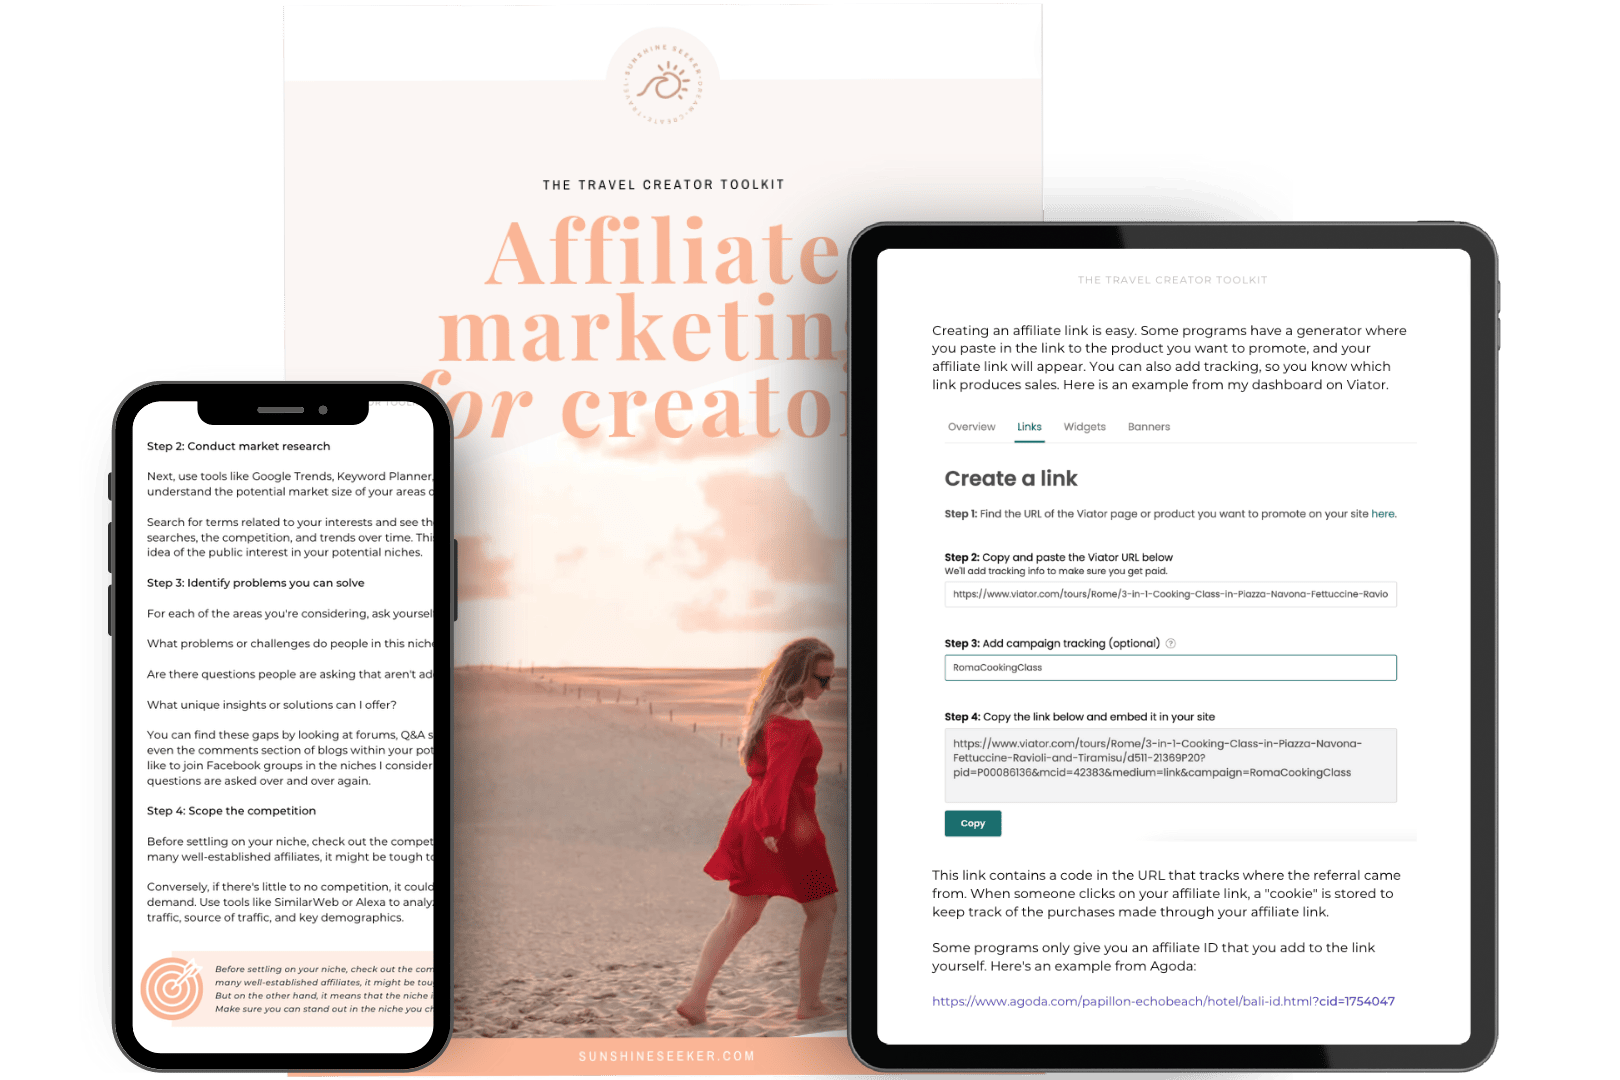 Affiliate marketing guide for creators included in the Travel Creator Toolkit